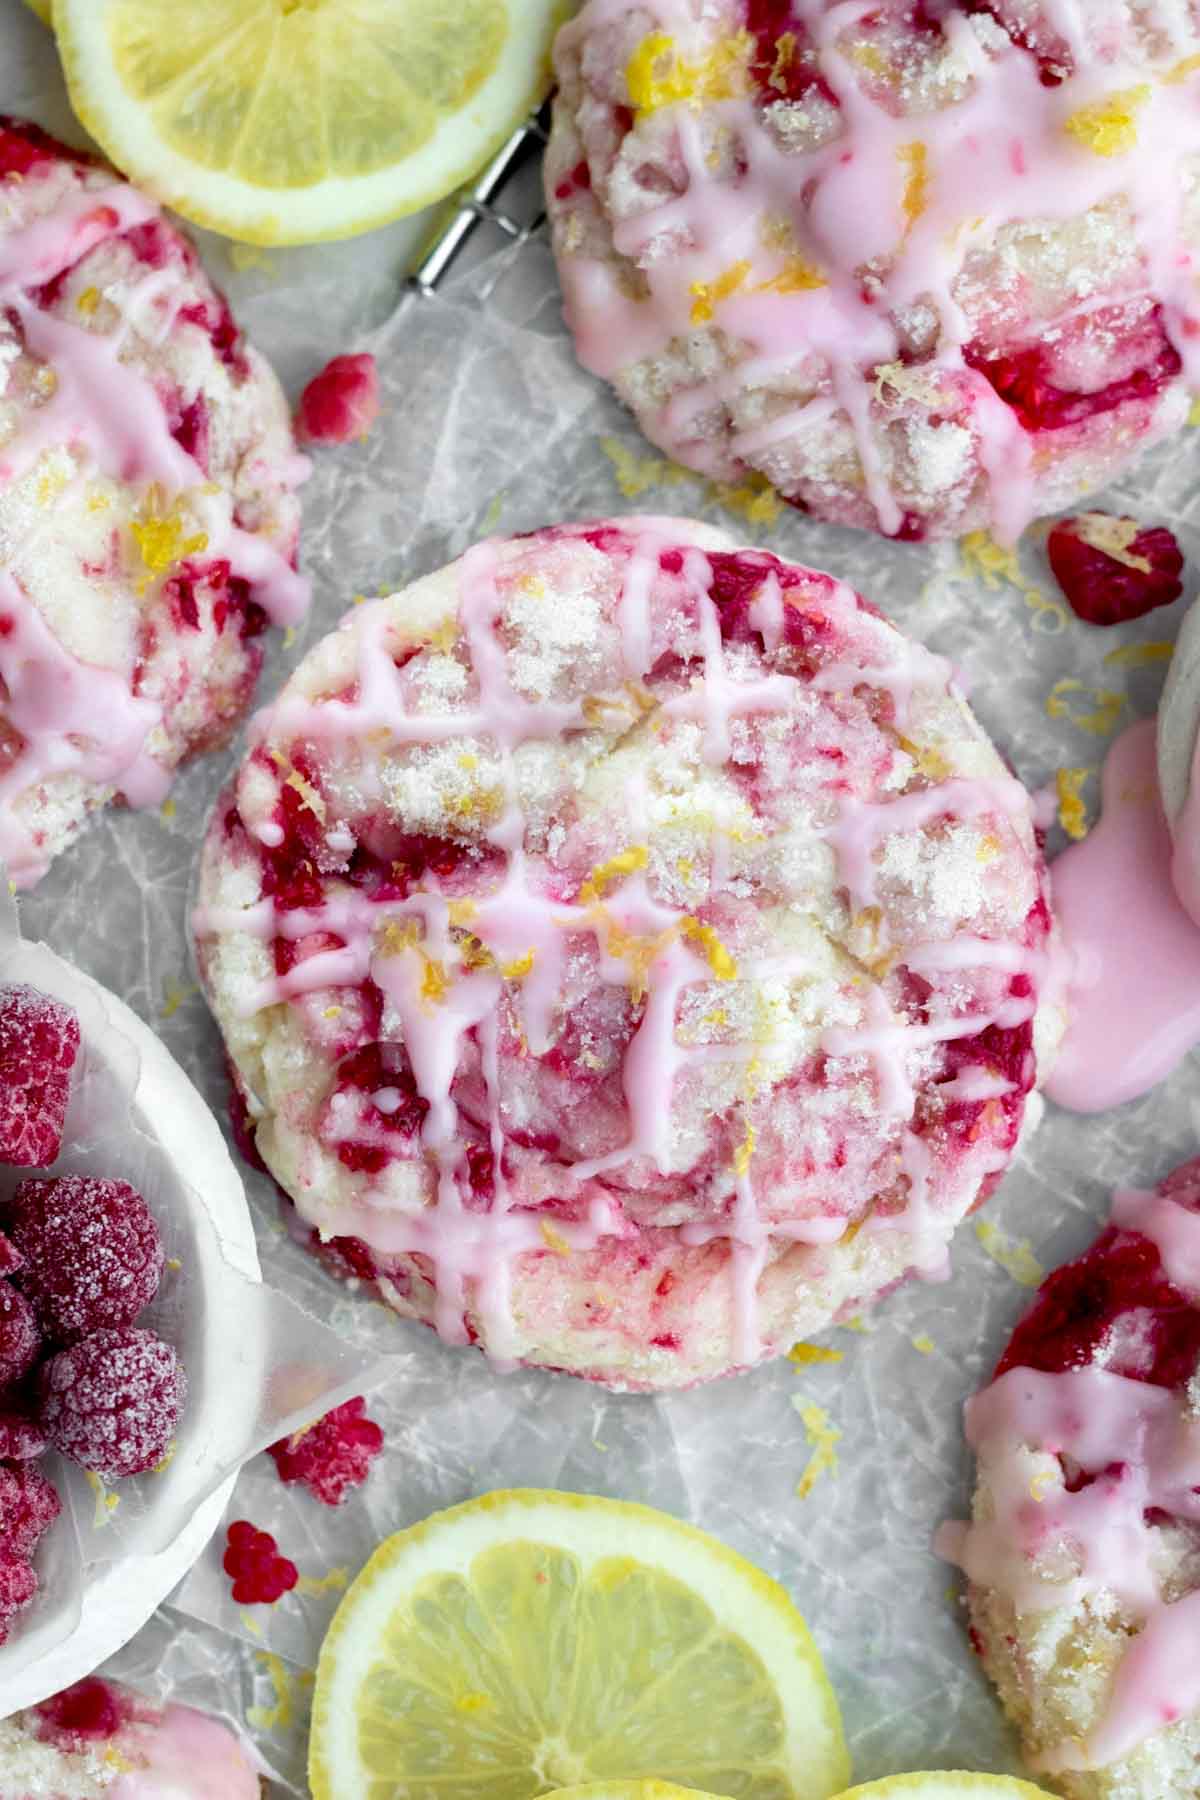 Raspberry breaks through bright red cracks the cookie with shards of lemon zest and pink glaze.